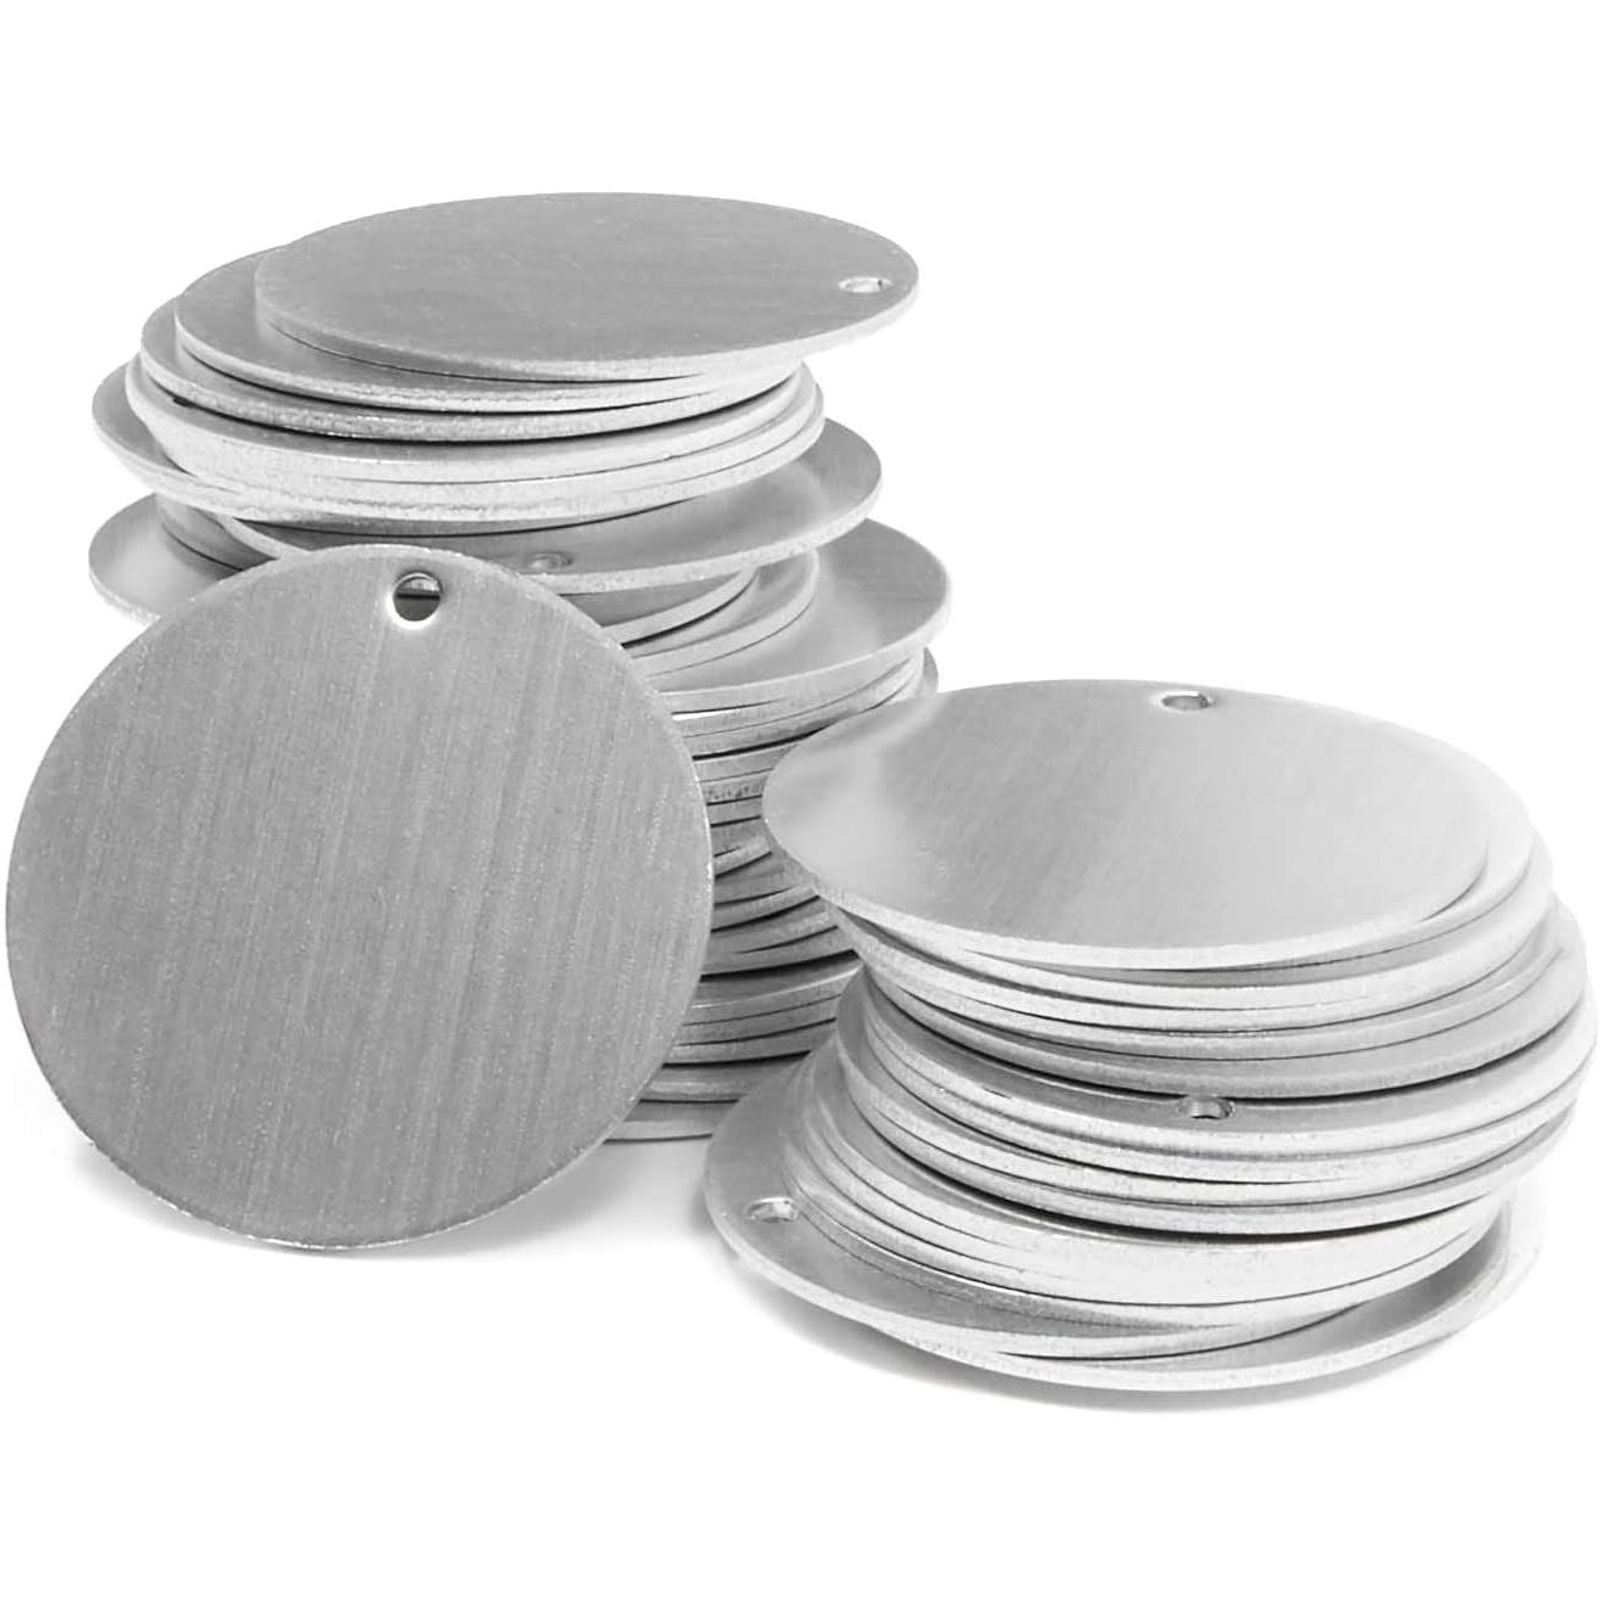 50 Count Metal Stamping Blanks, 2 inch Diameter, 0.06 inch Thick